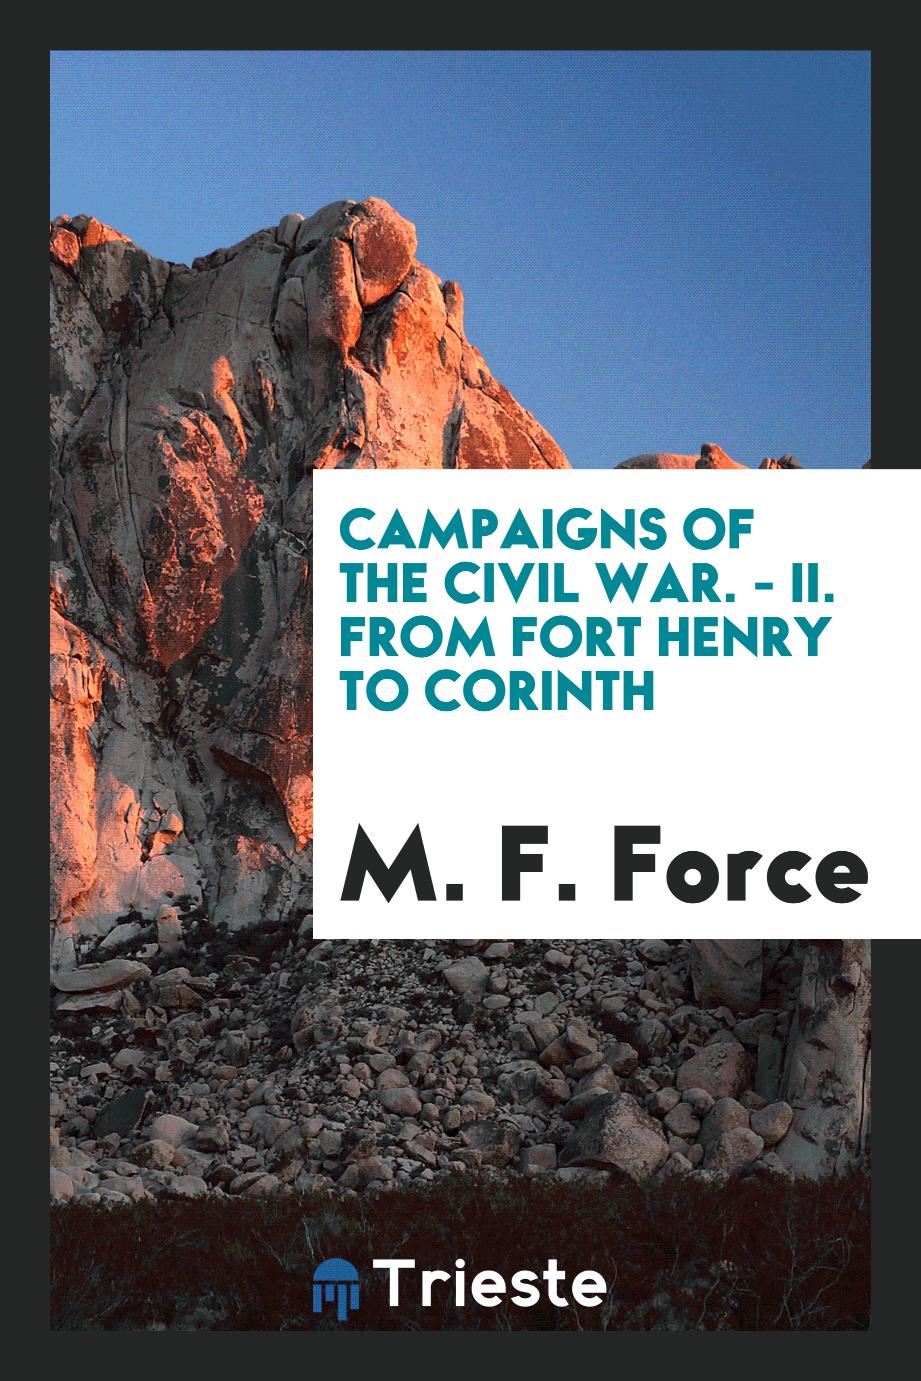 Campaigns of the Civil War. - II. From Fort Henry to Corinth